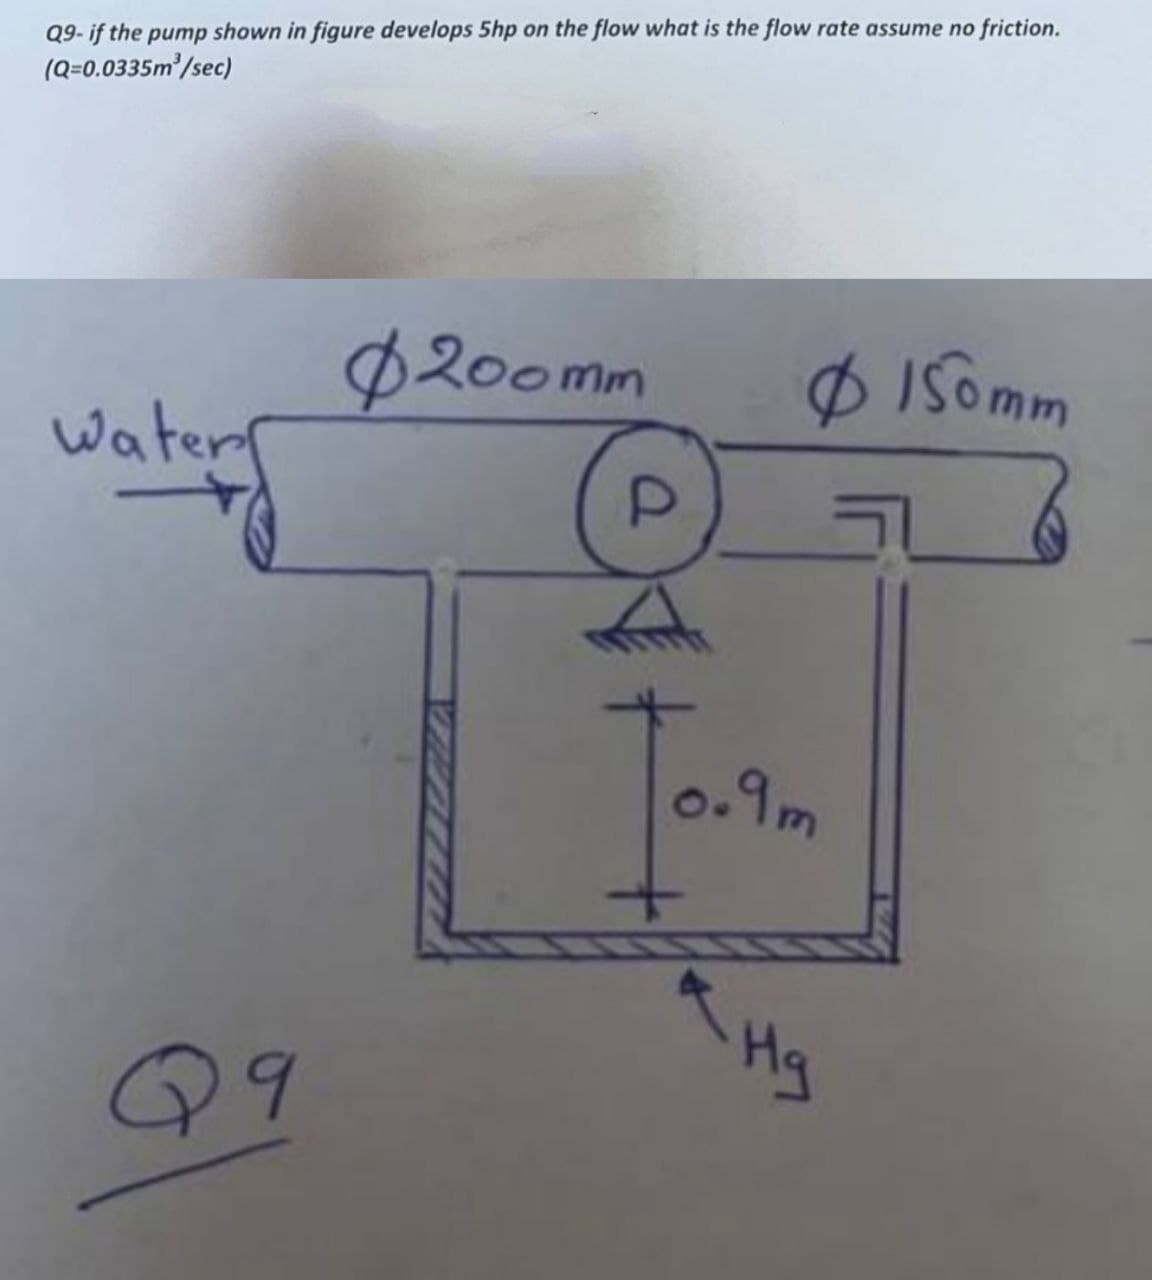 Q9- if the pump shown in figure develops 5hp on the flow what is the flow rate assume no friction.
(Q=0.0335m²/sec)
P20omm
Ø 1Somm
water
0.9m
Hg
Q9
